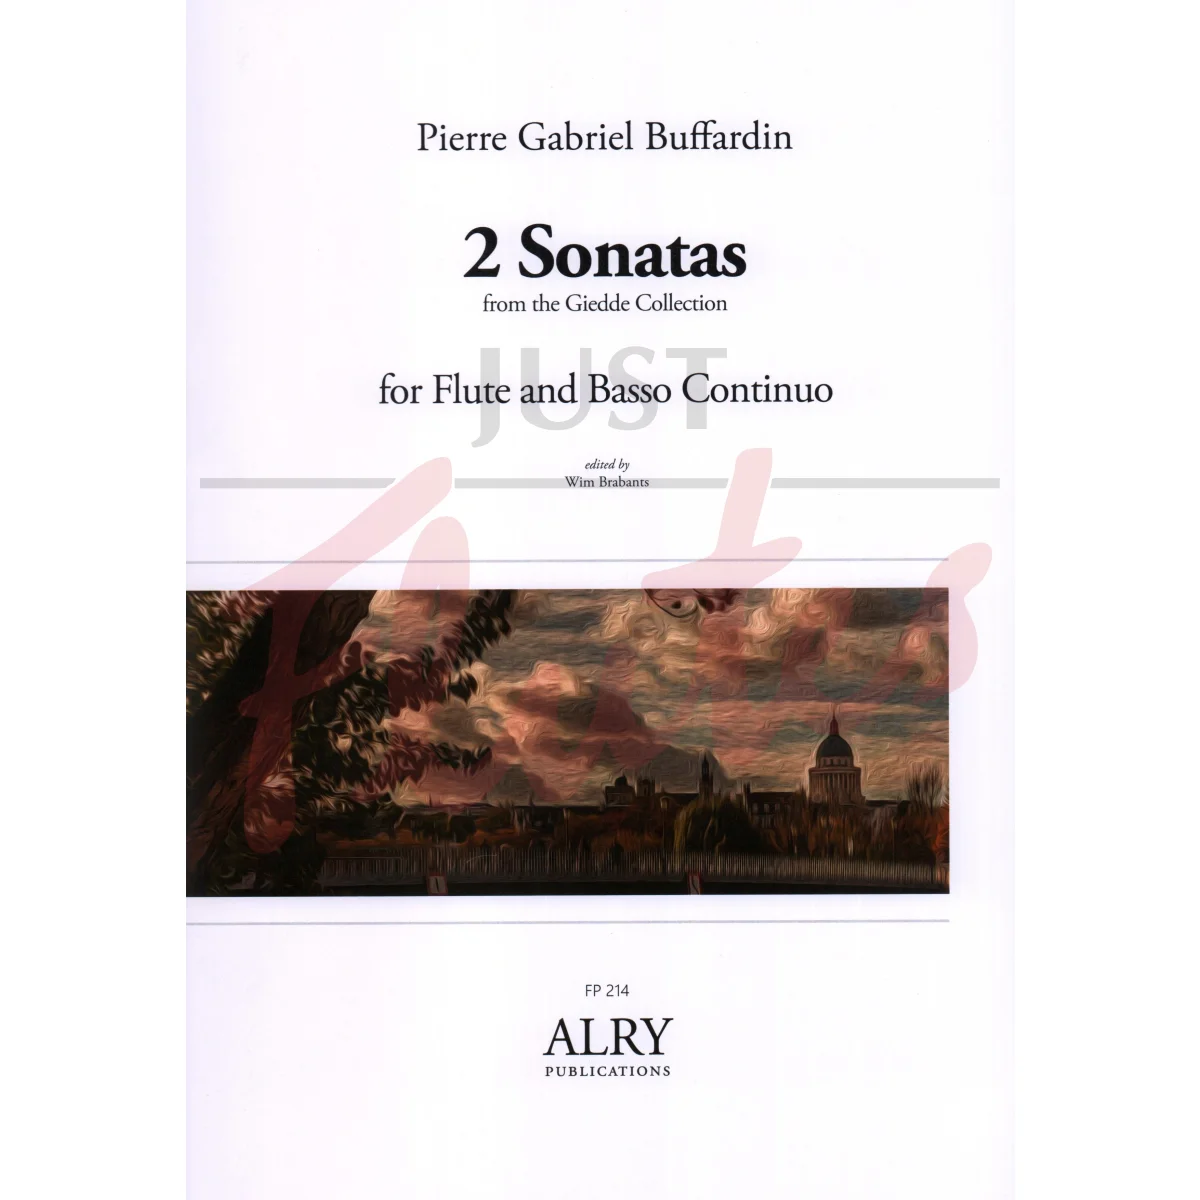 2 Sonatas from The Giedde Collection for Flute and Basso Continuo